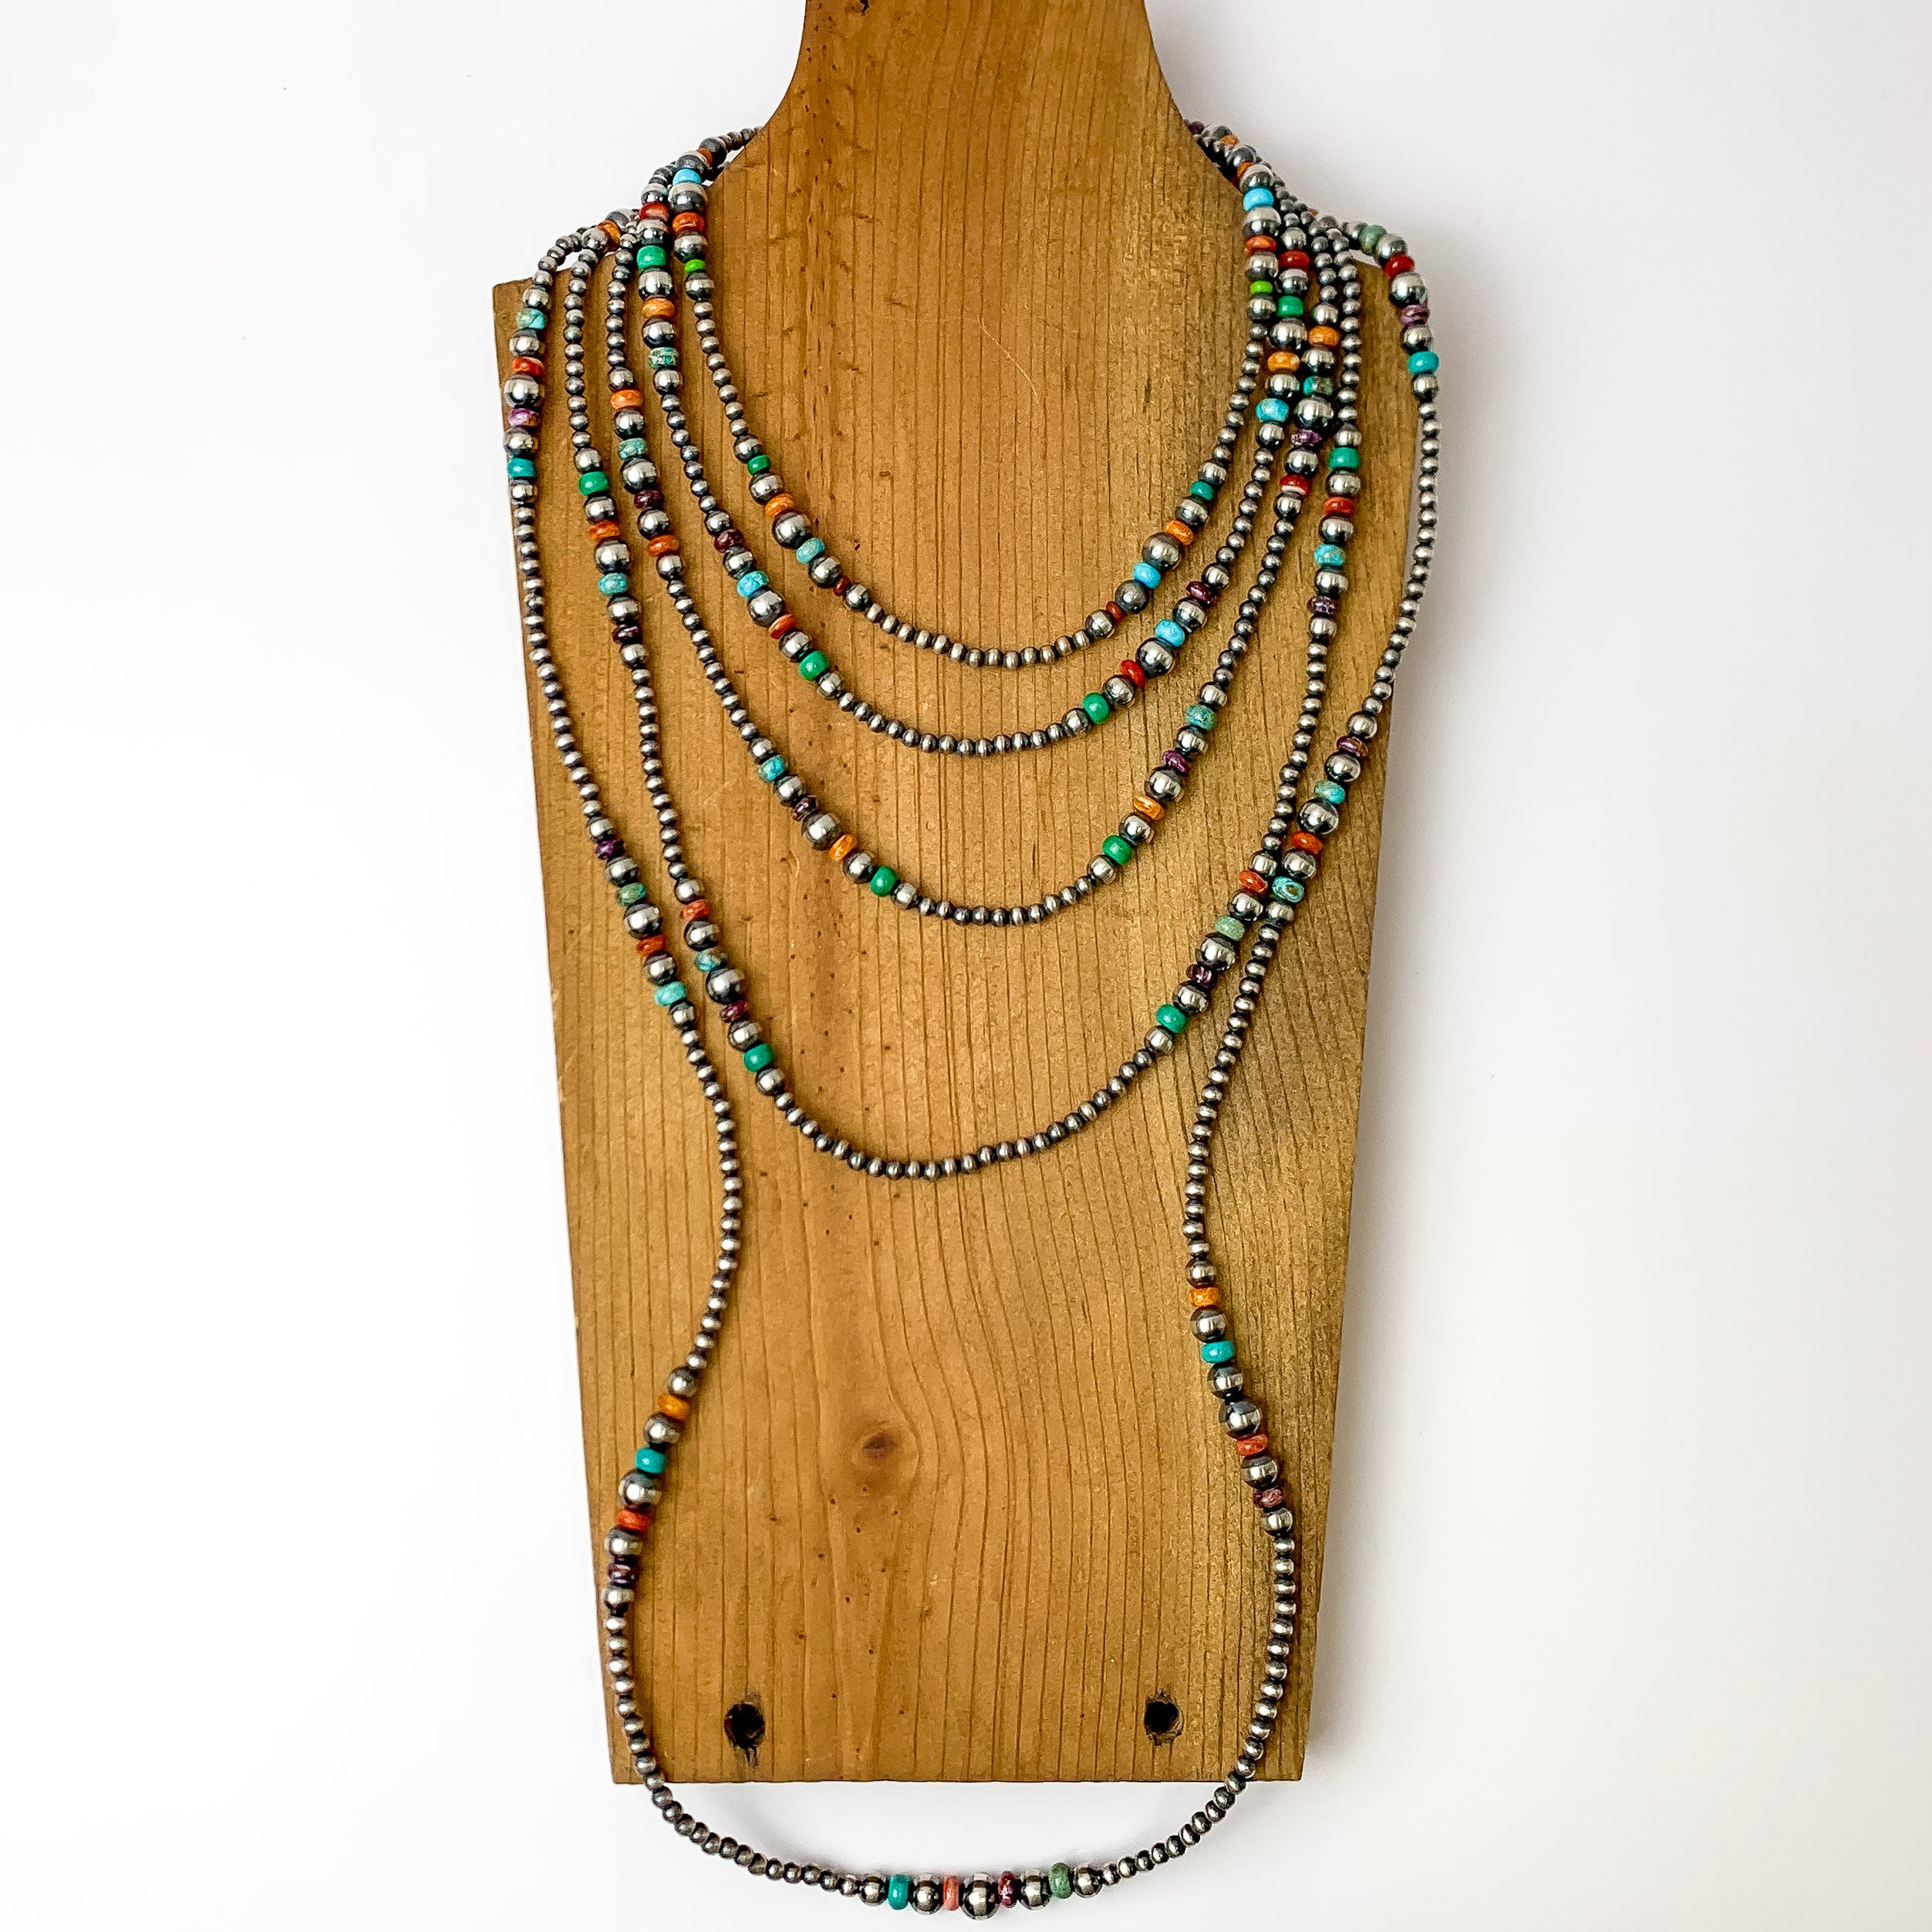 Navajo pearls are laid on a wooden necklace stand. Background is solid white. 